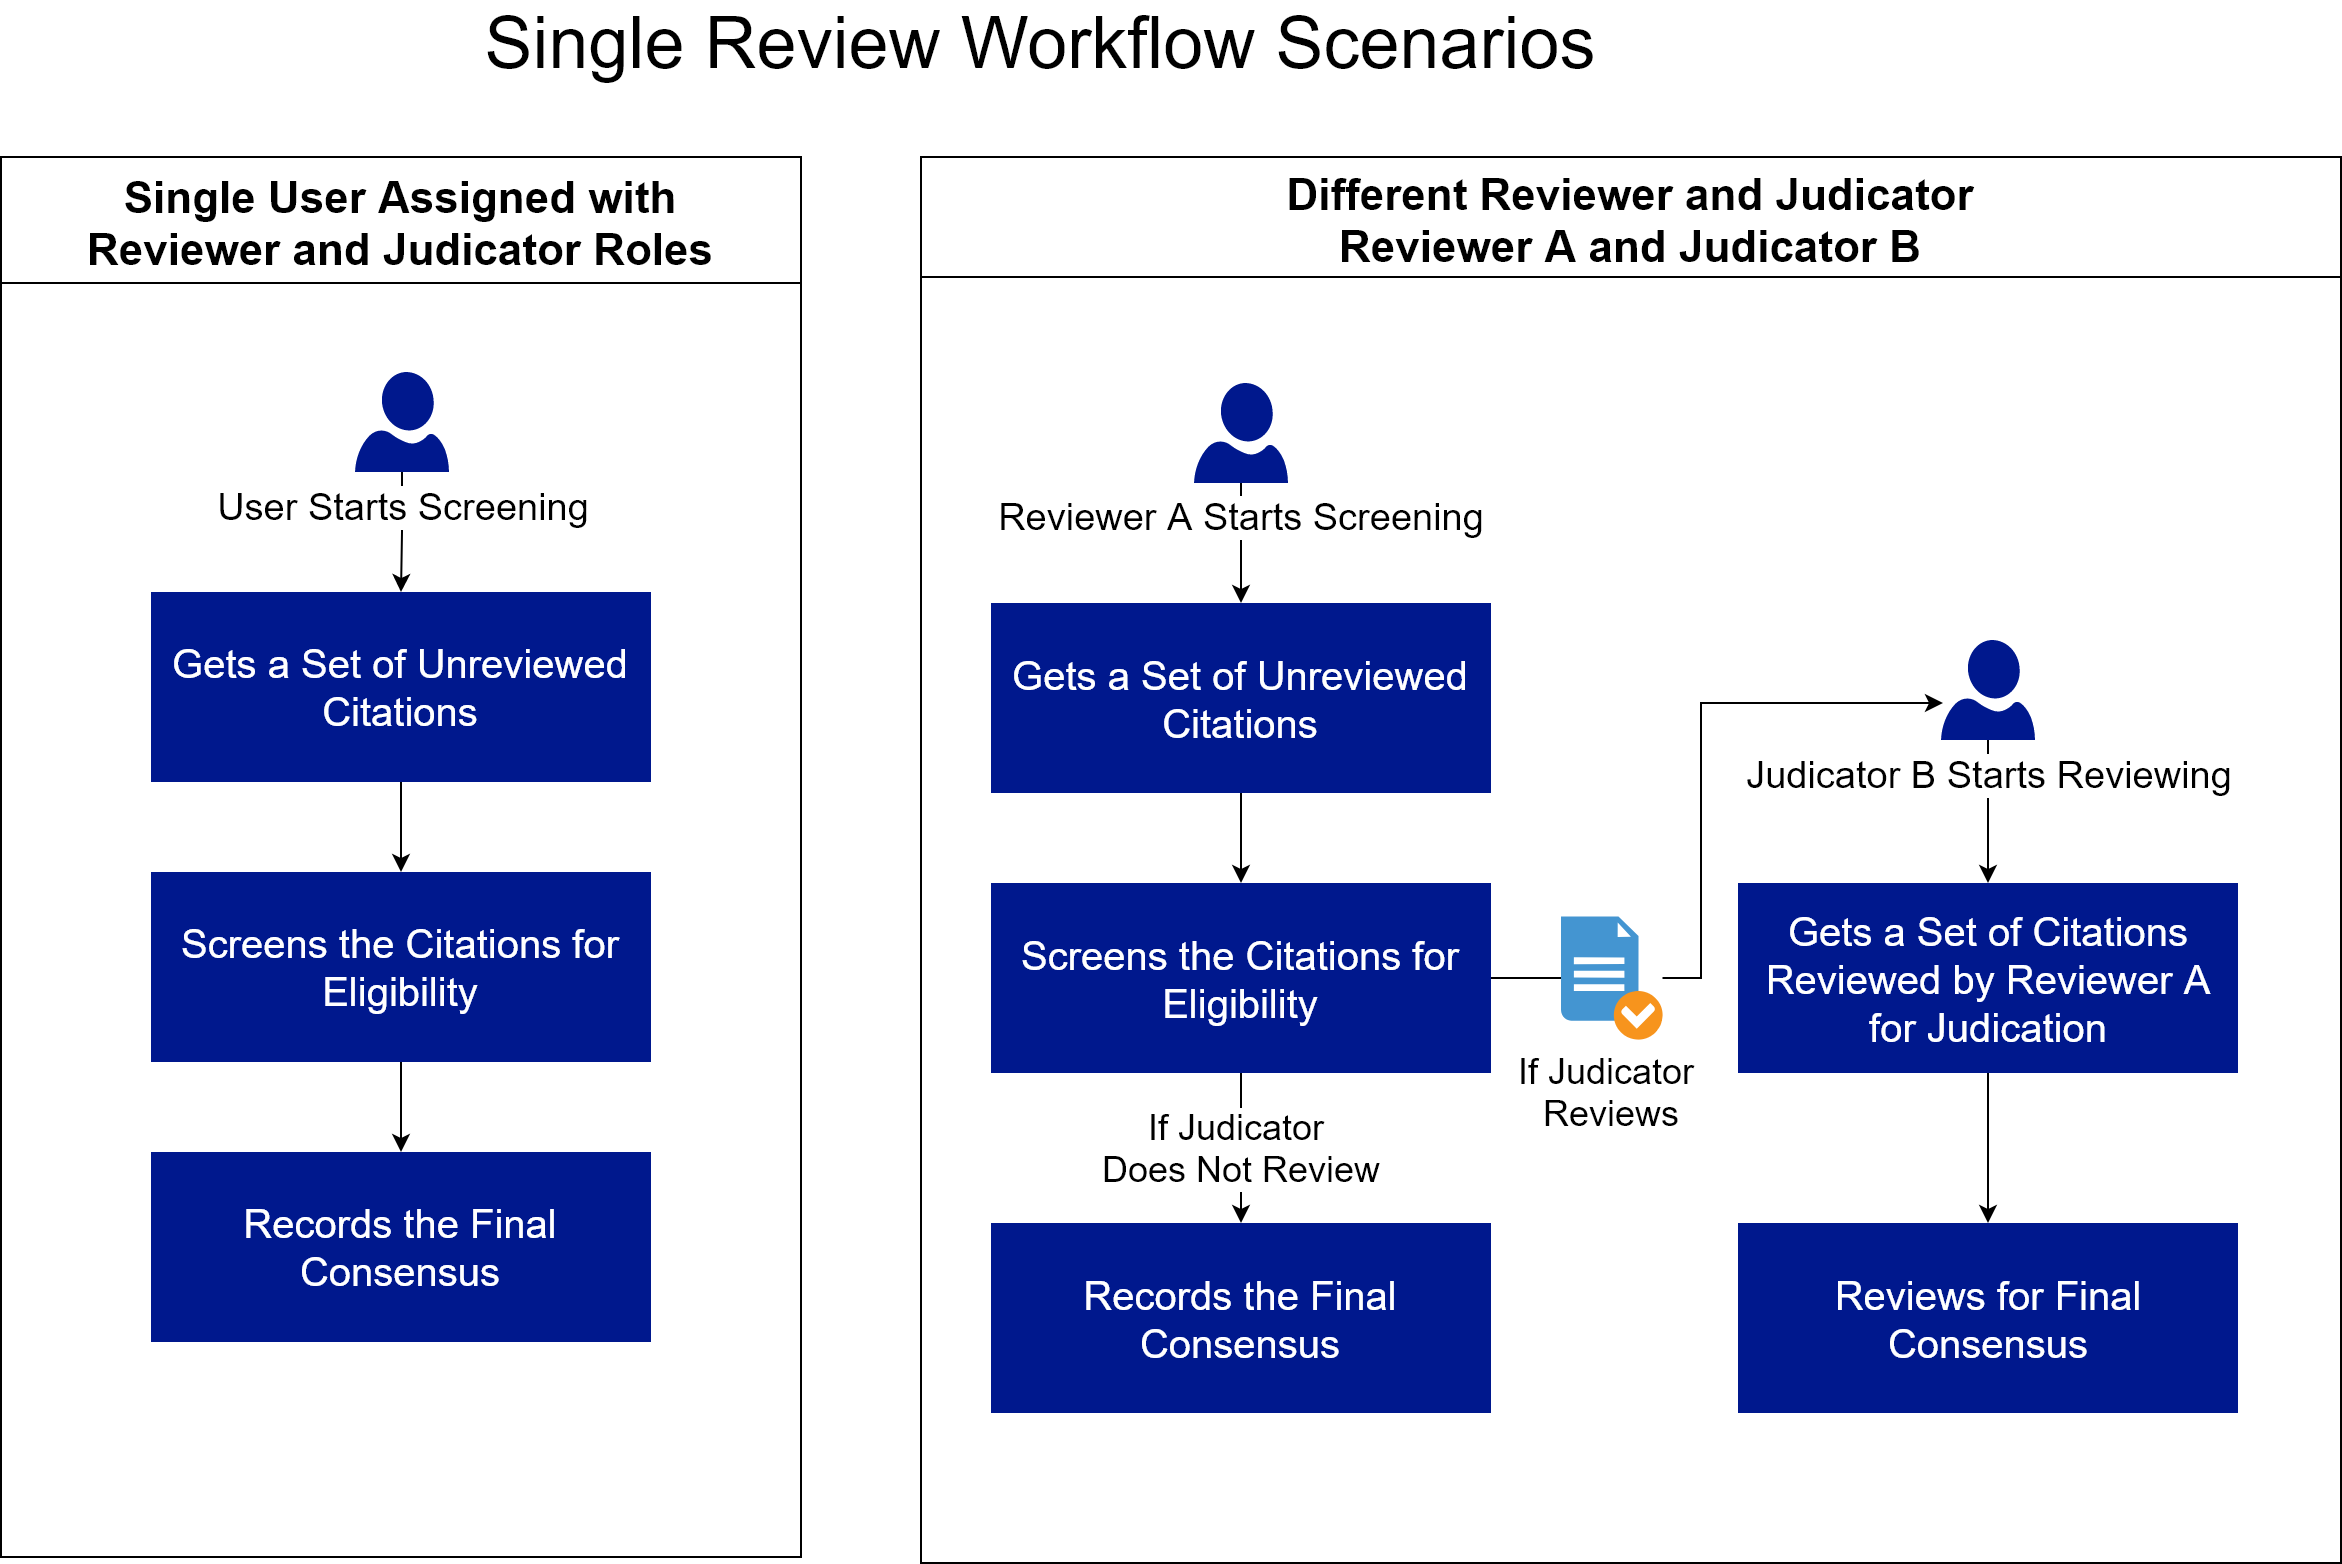 Single Review Workflow